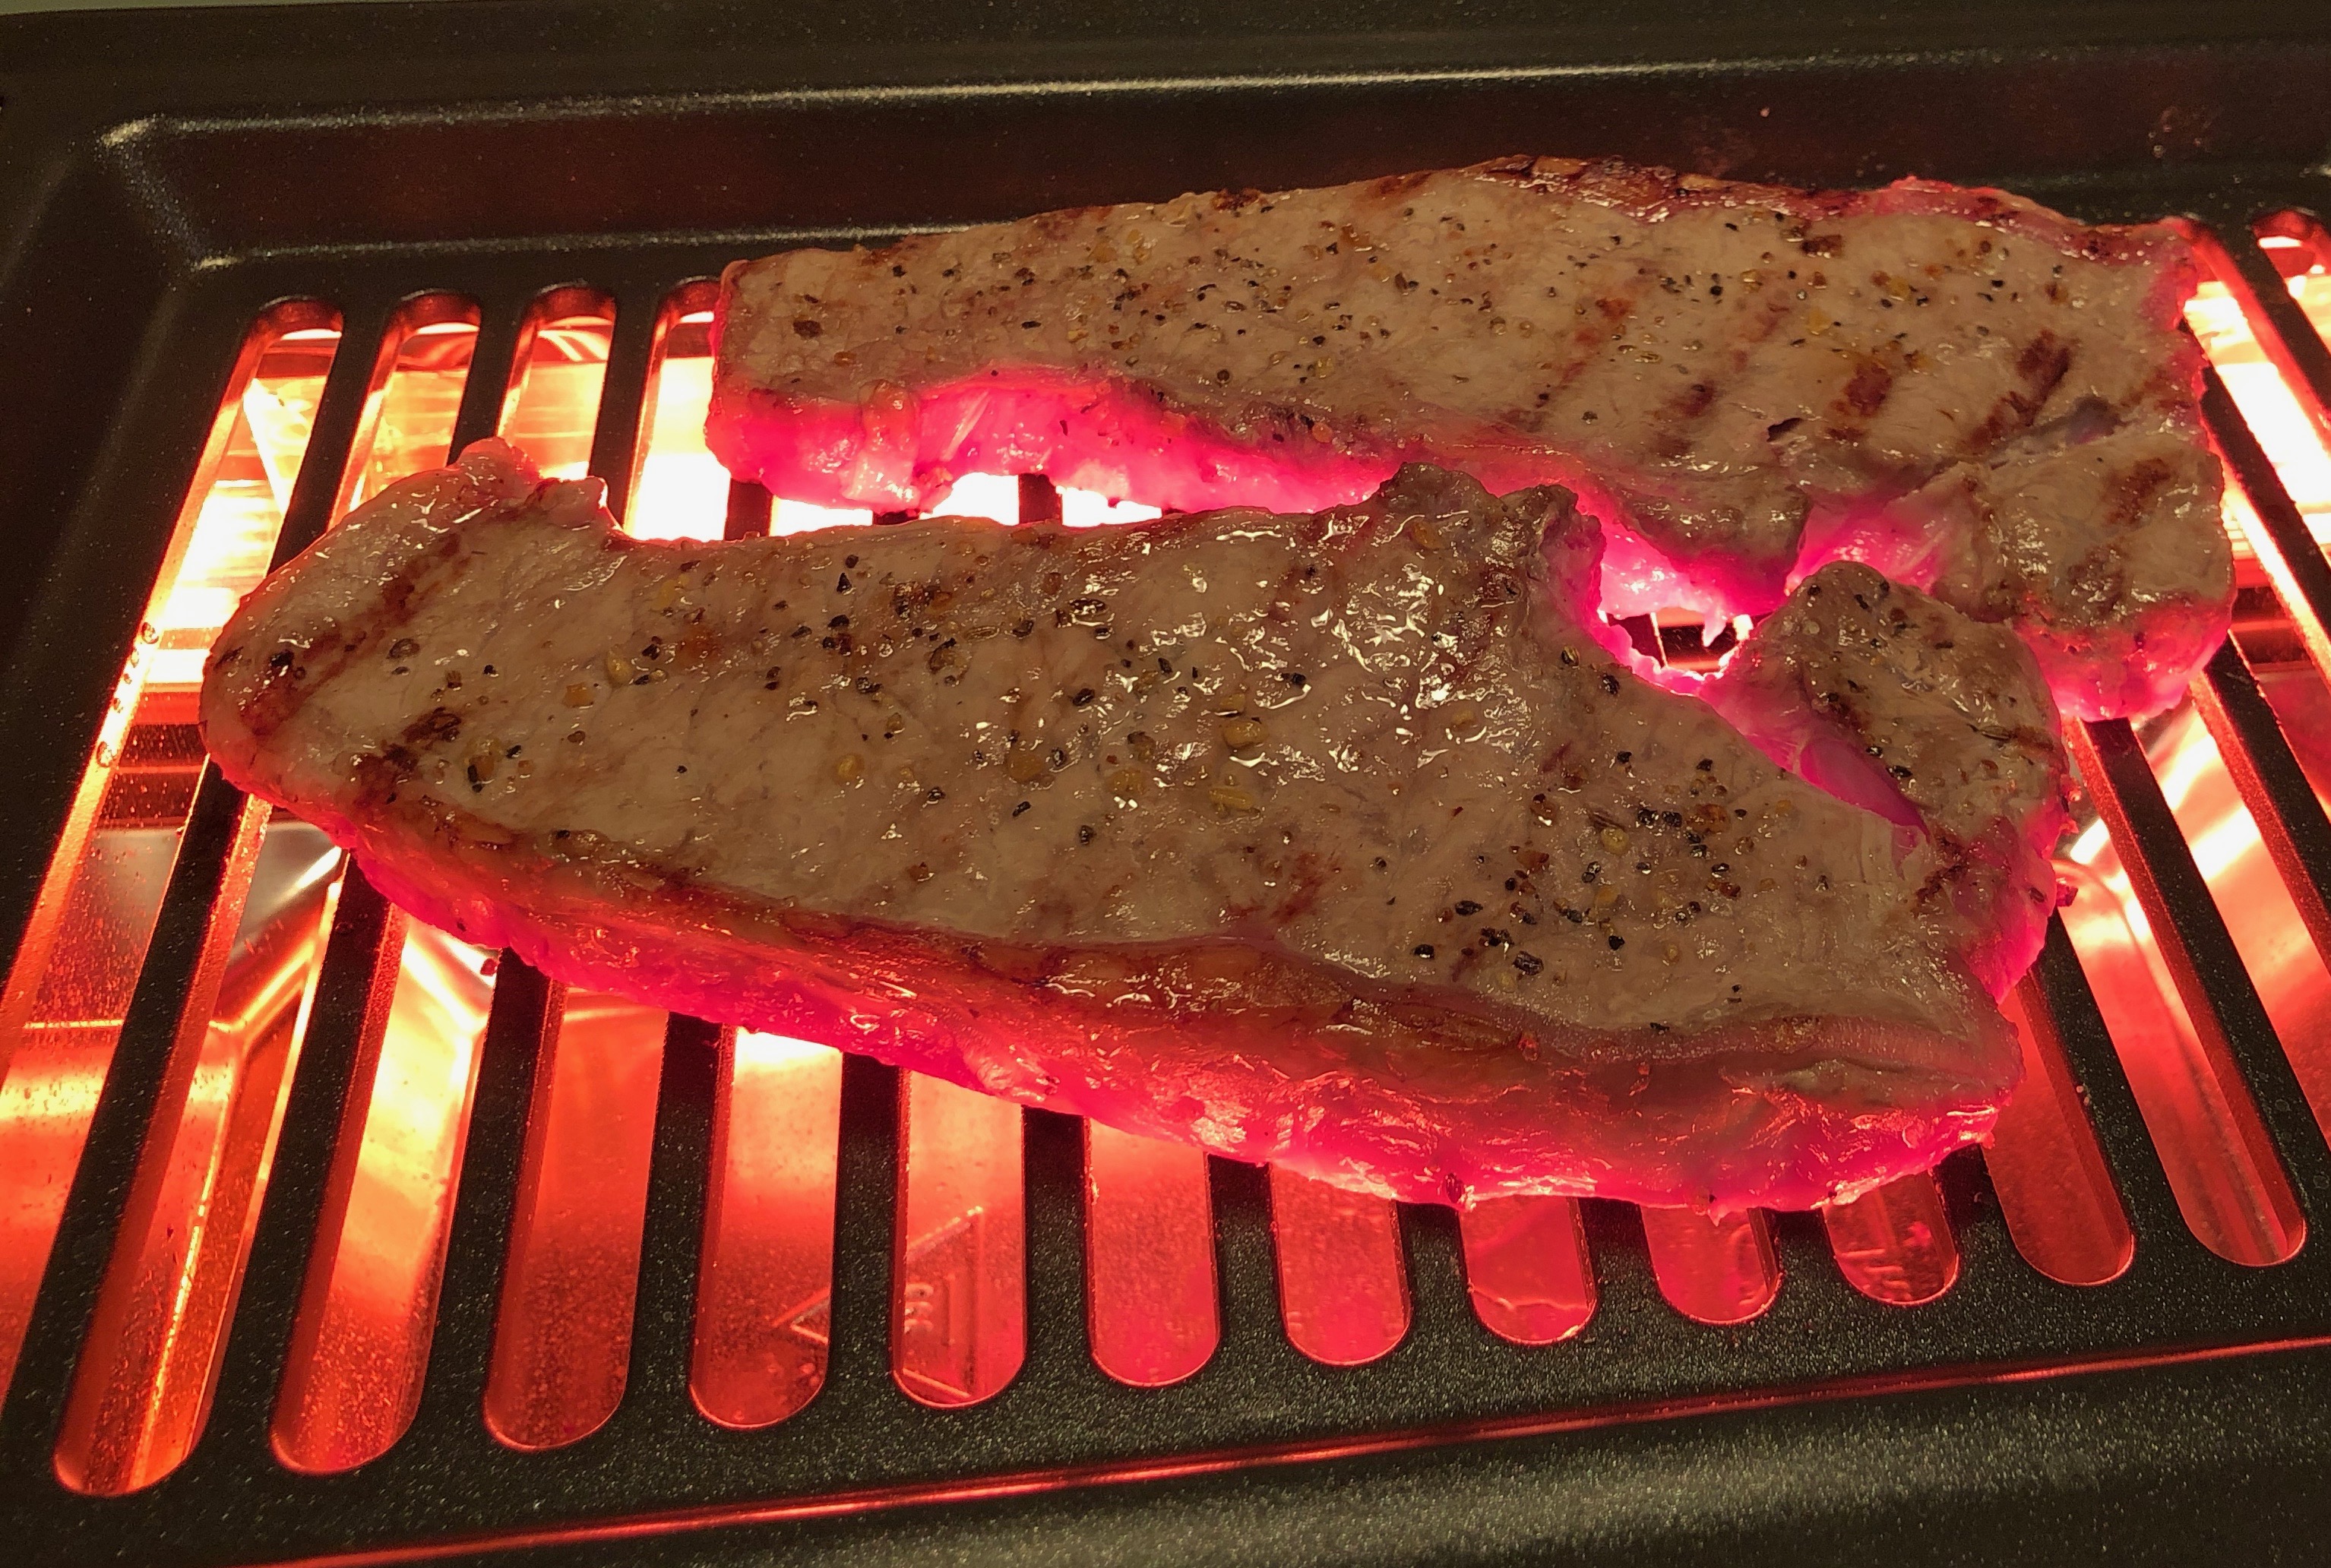 Cooker Review: Tenergy Redigrill Smokeless Infrared Grill - Grill